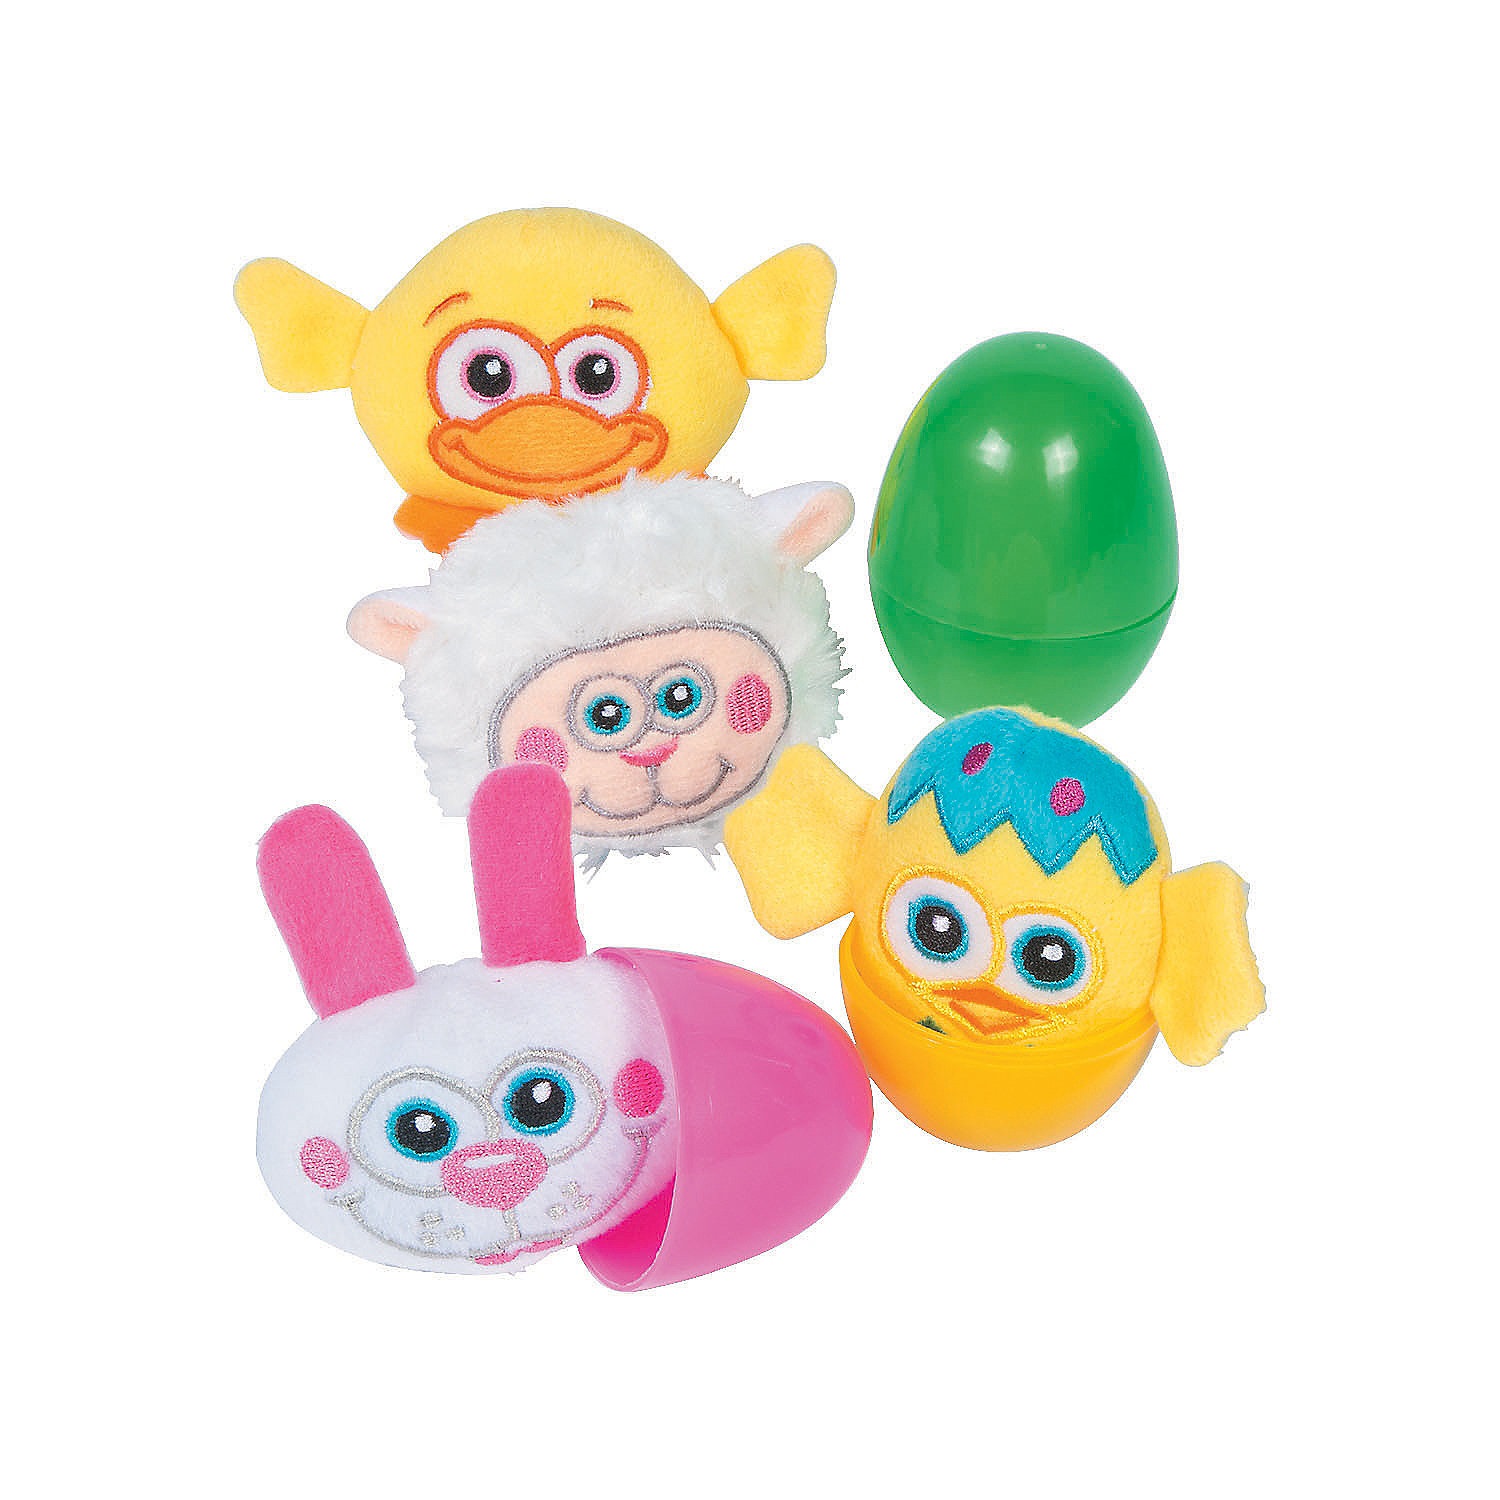 3-easter-eggs-with-chick-bunny-duck-lamb-stuffed-animal-character-12-pc-_13760739